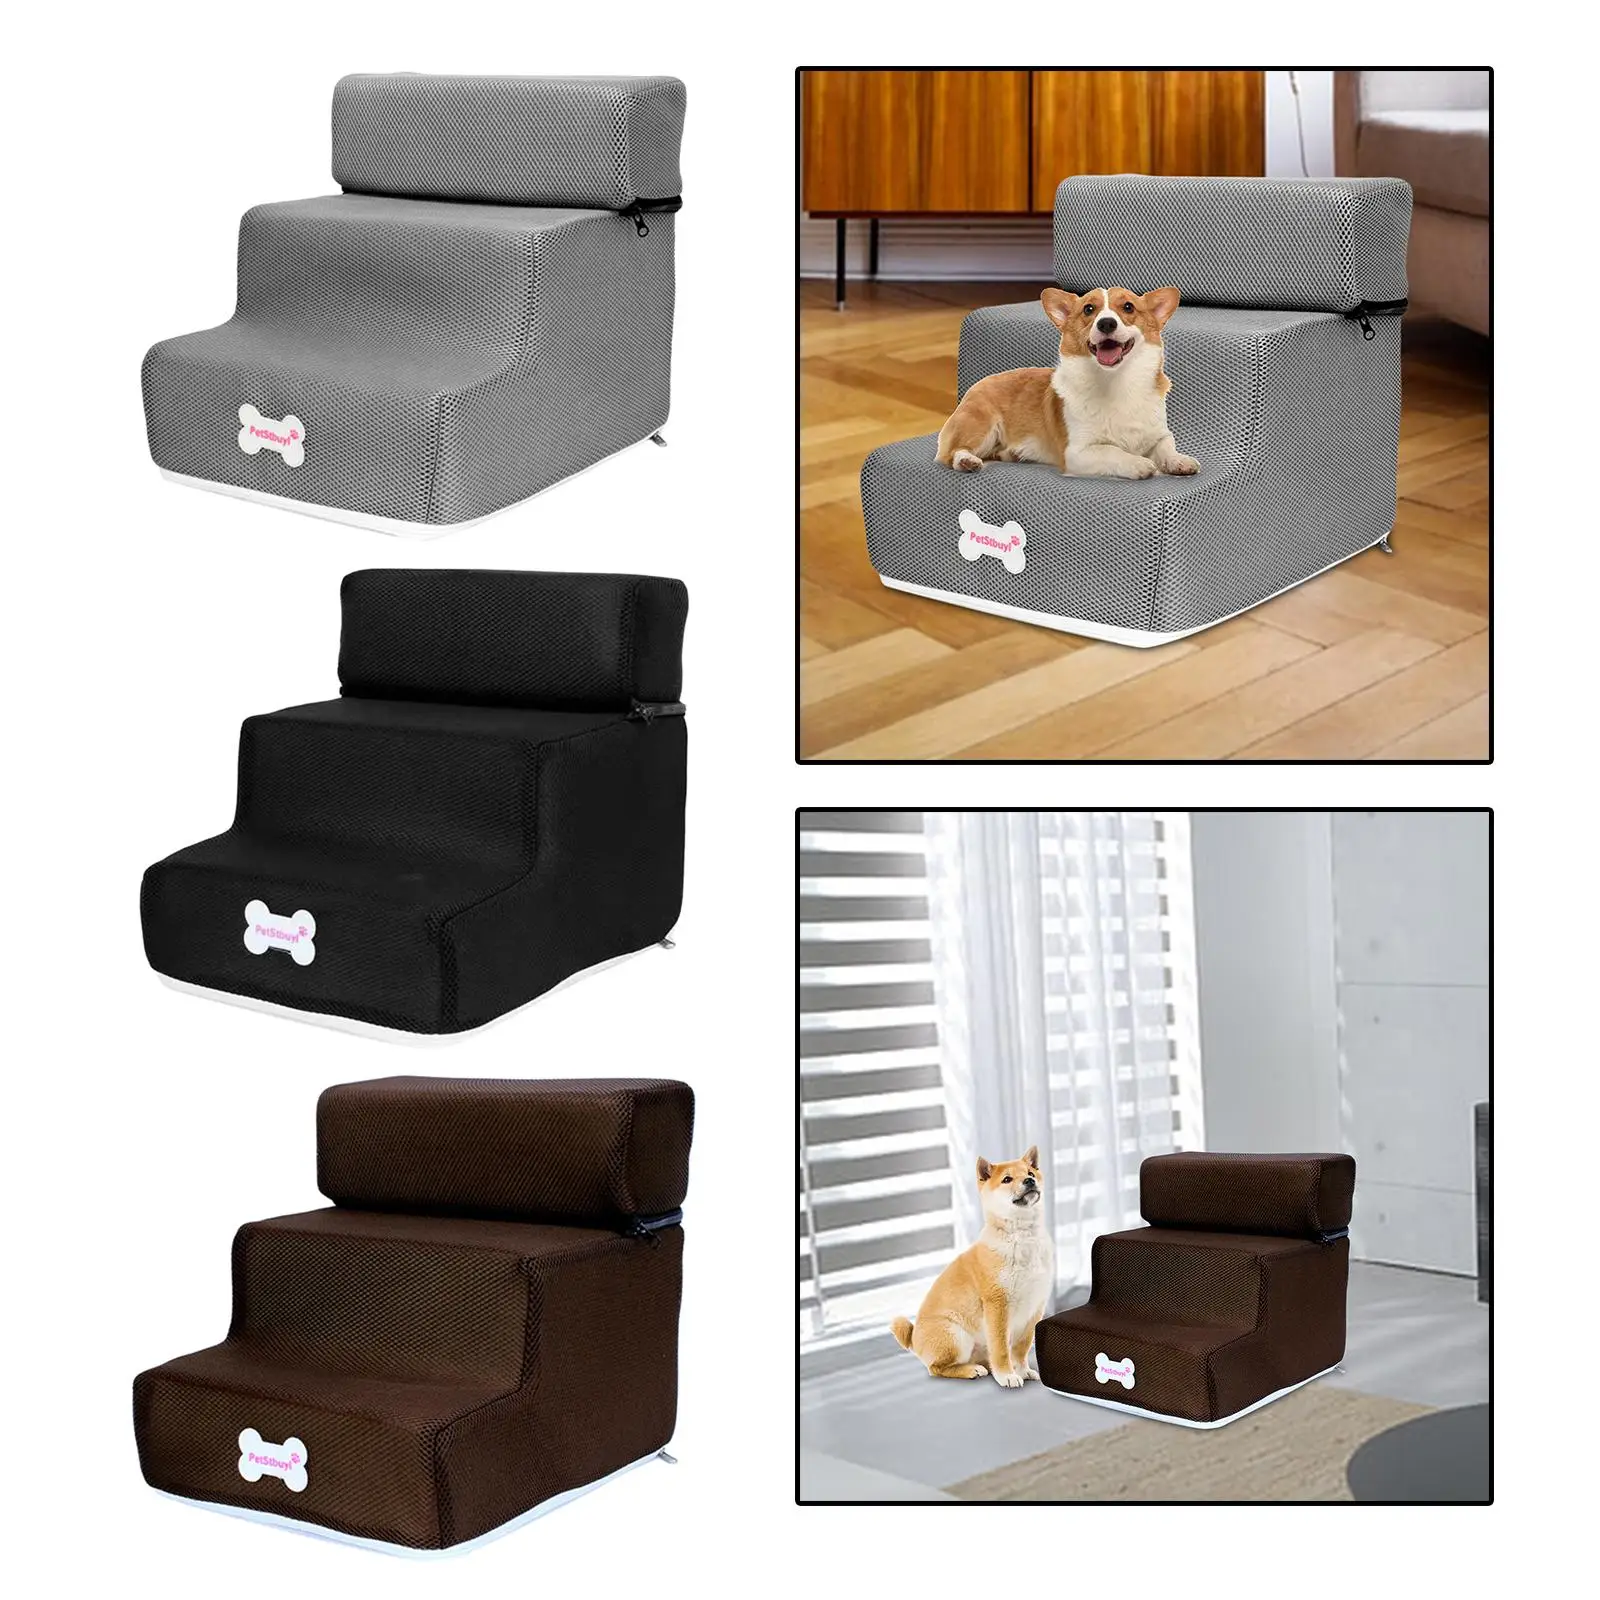 Dog Stairs Steps, Pet Stairs Steps for High Beds, 3 Layer Pet Storage Stepper Pet Steps for Dogs Cats